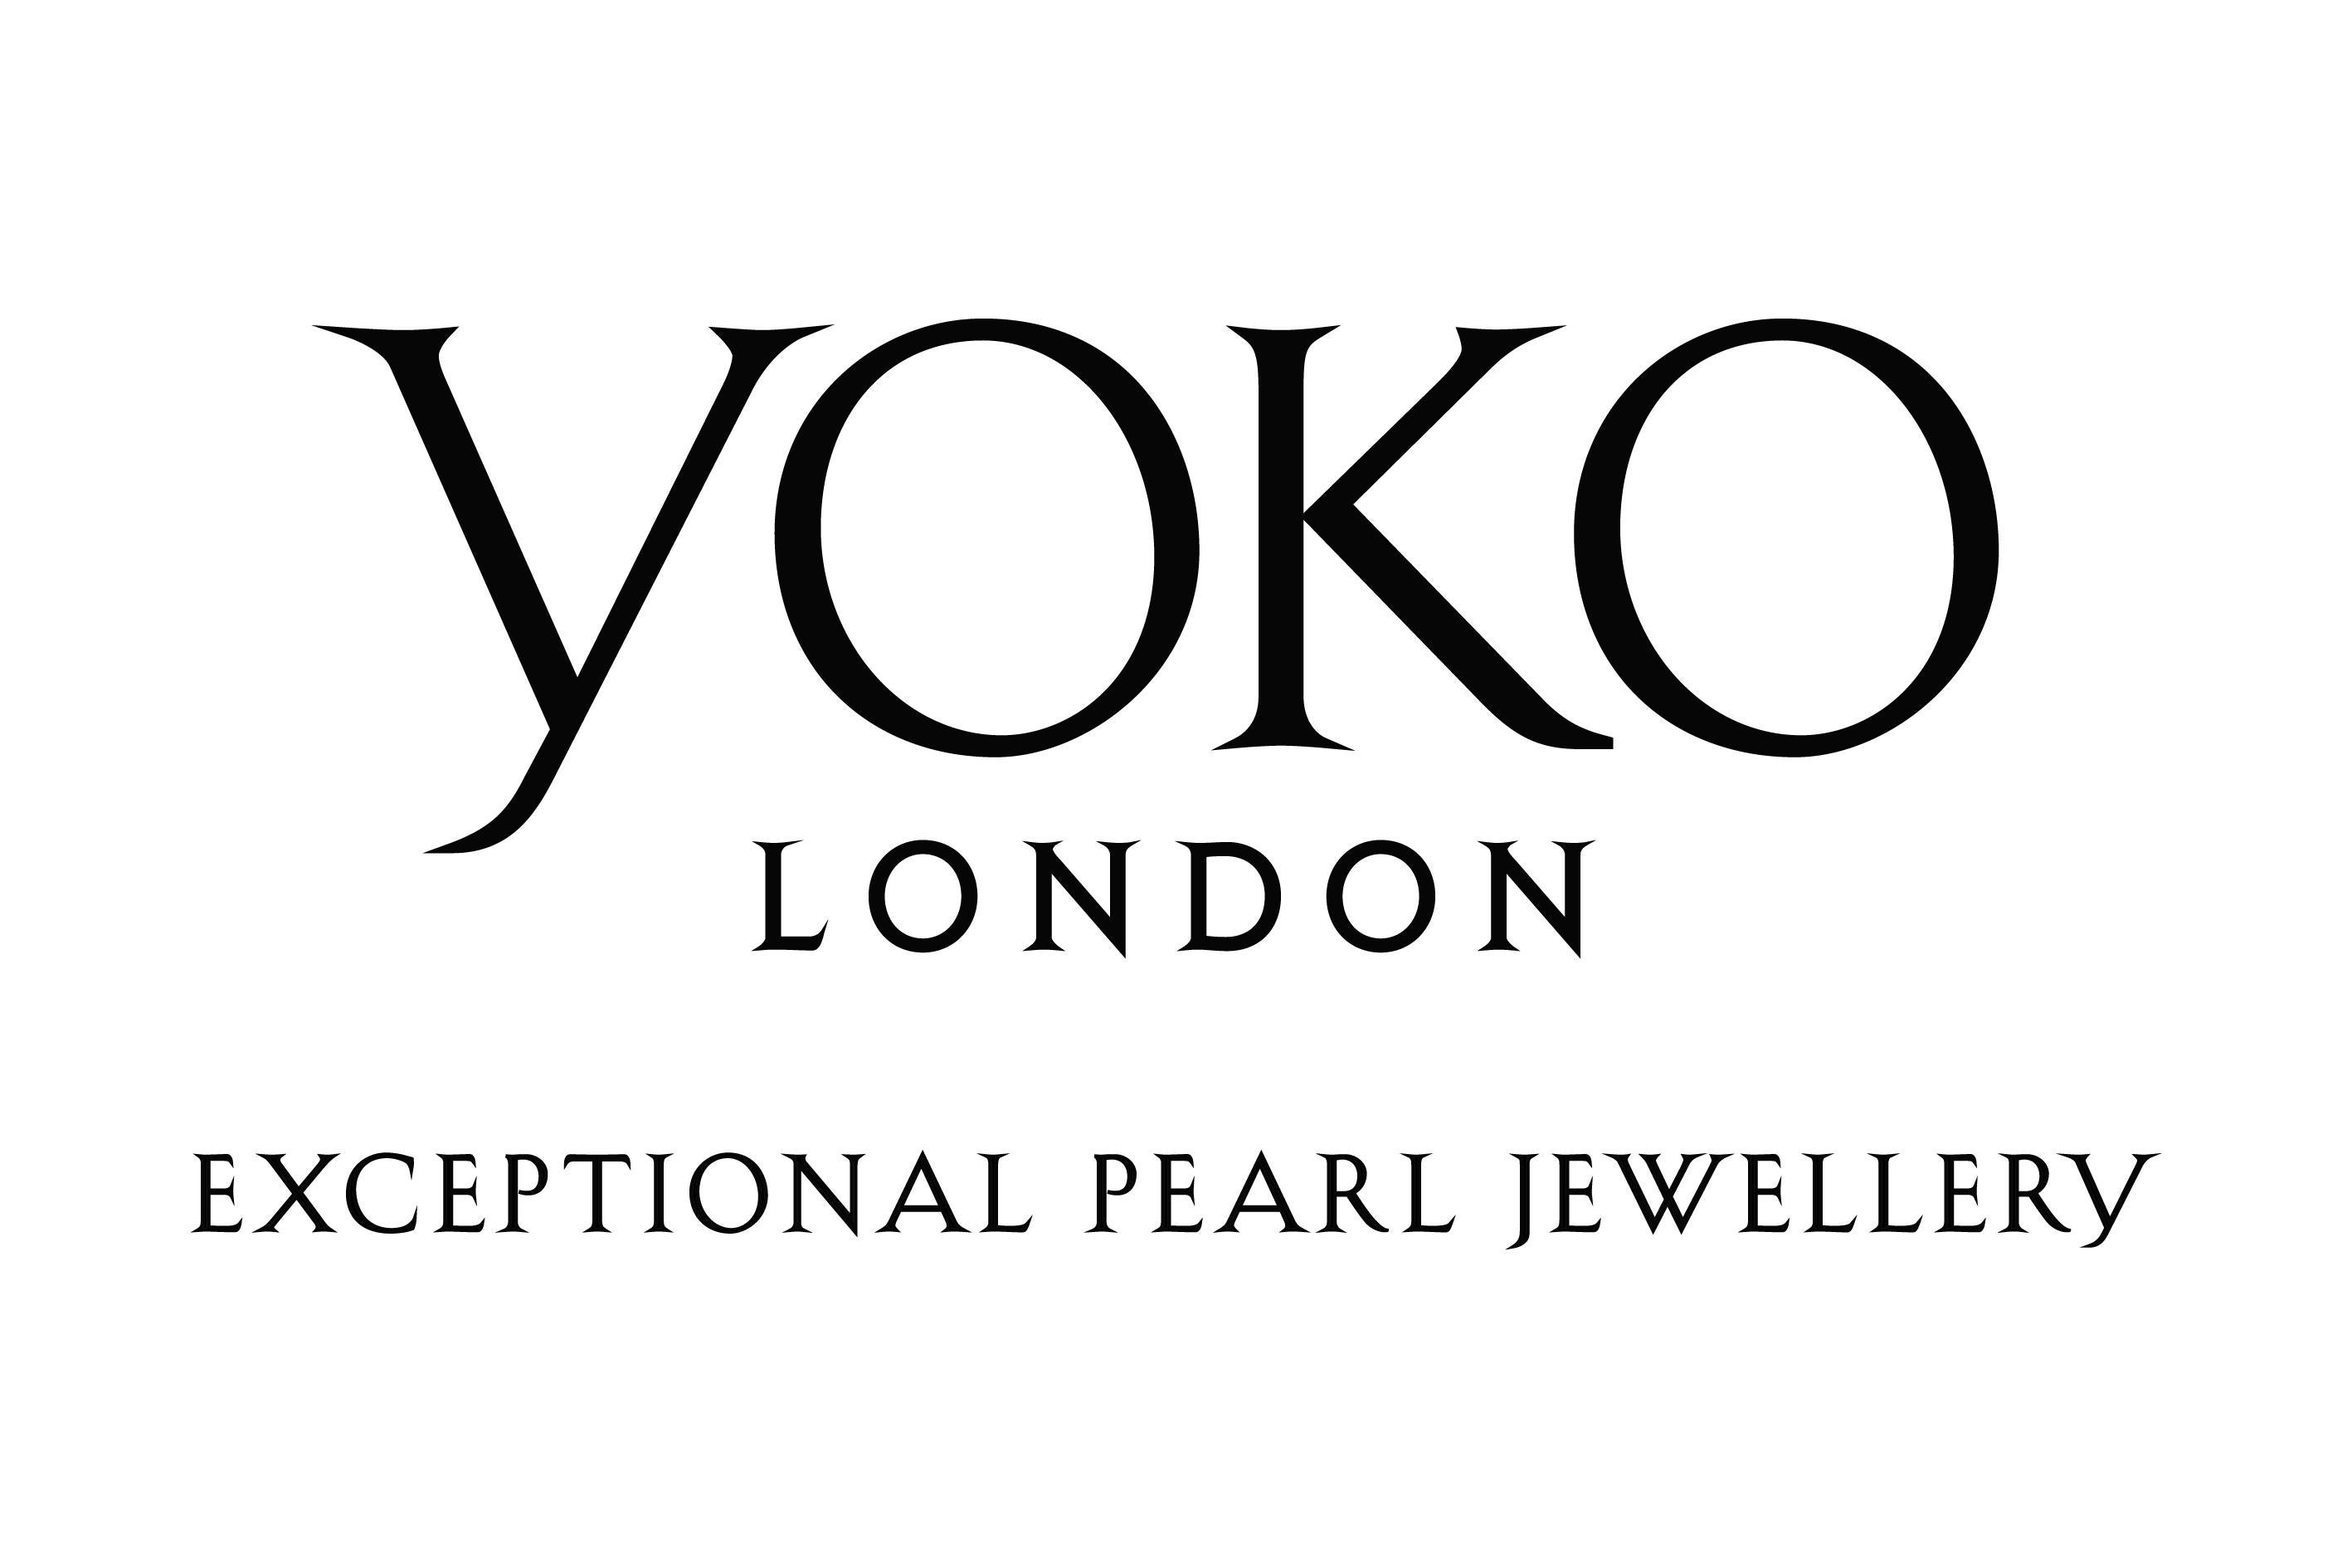 Round Cut Yoko London Pearl and Diamond Floral Necklace in 18 Karat Black and White Gold